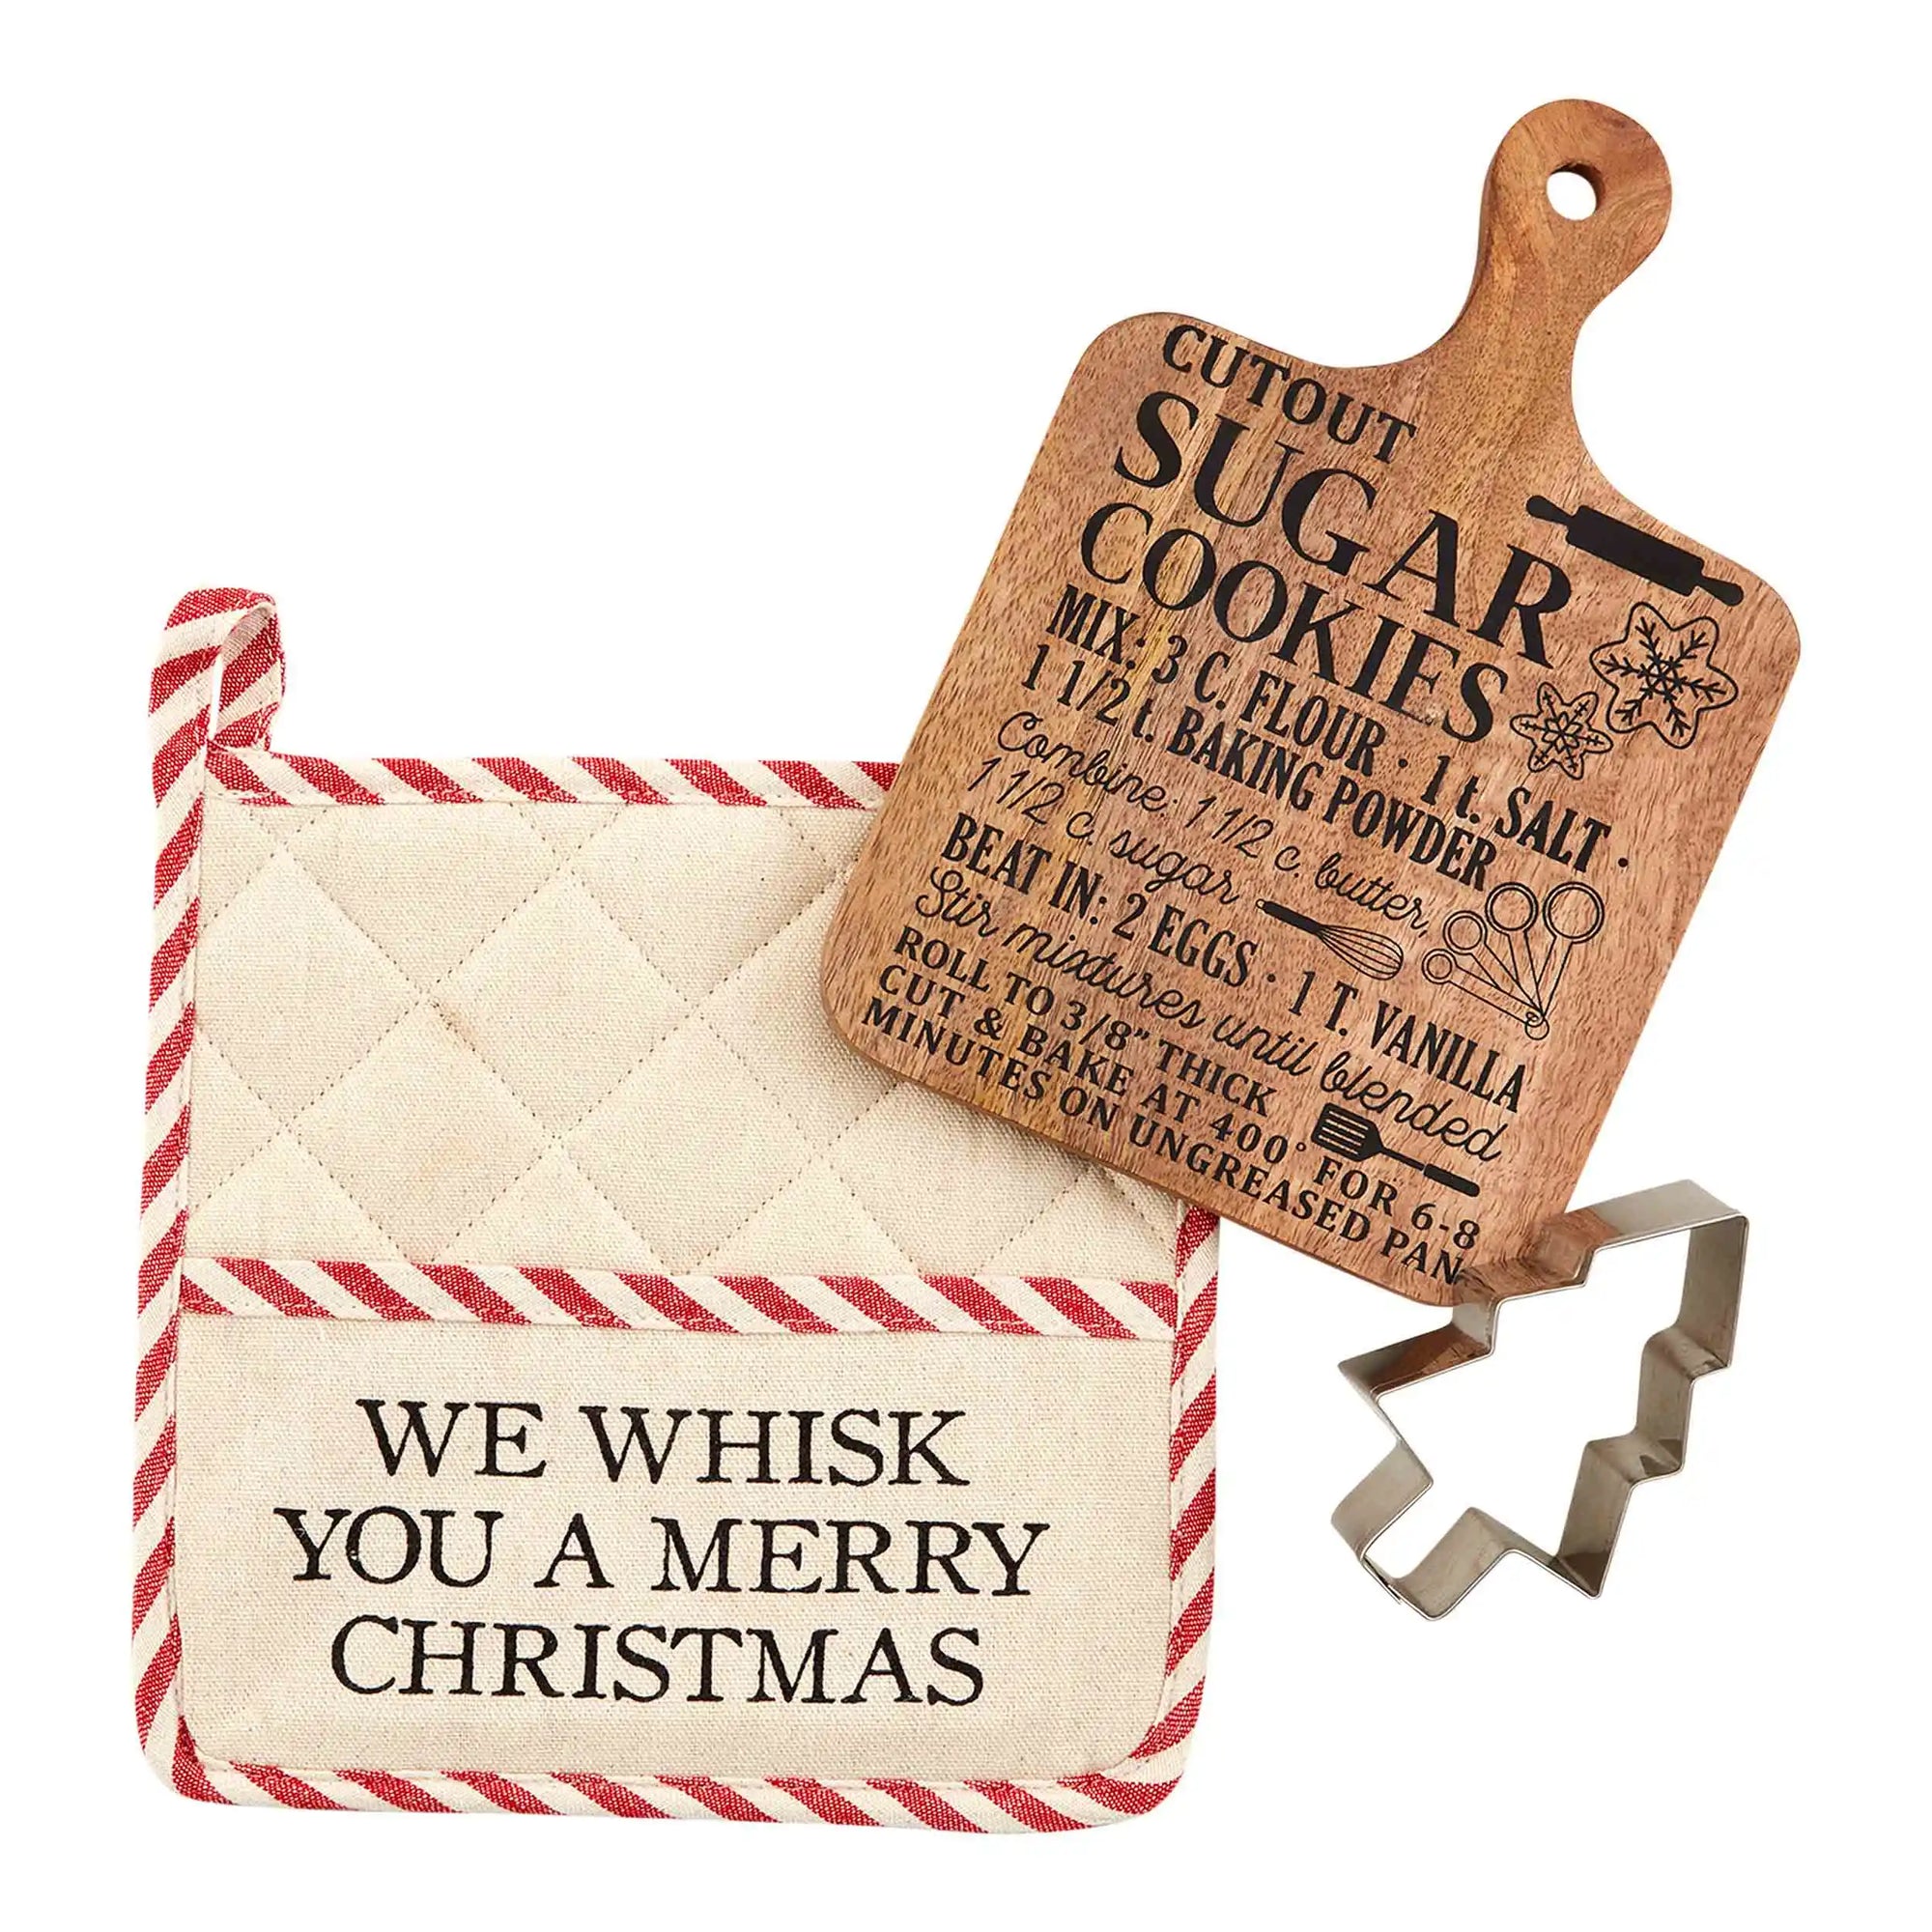 Whisk You A Merry Christmas Board Set